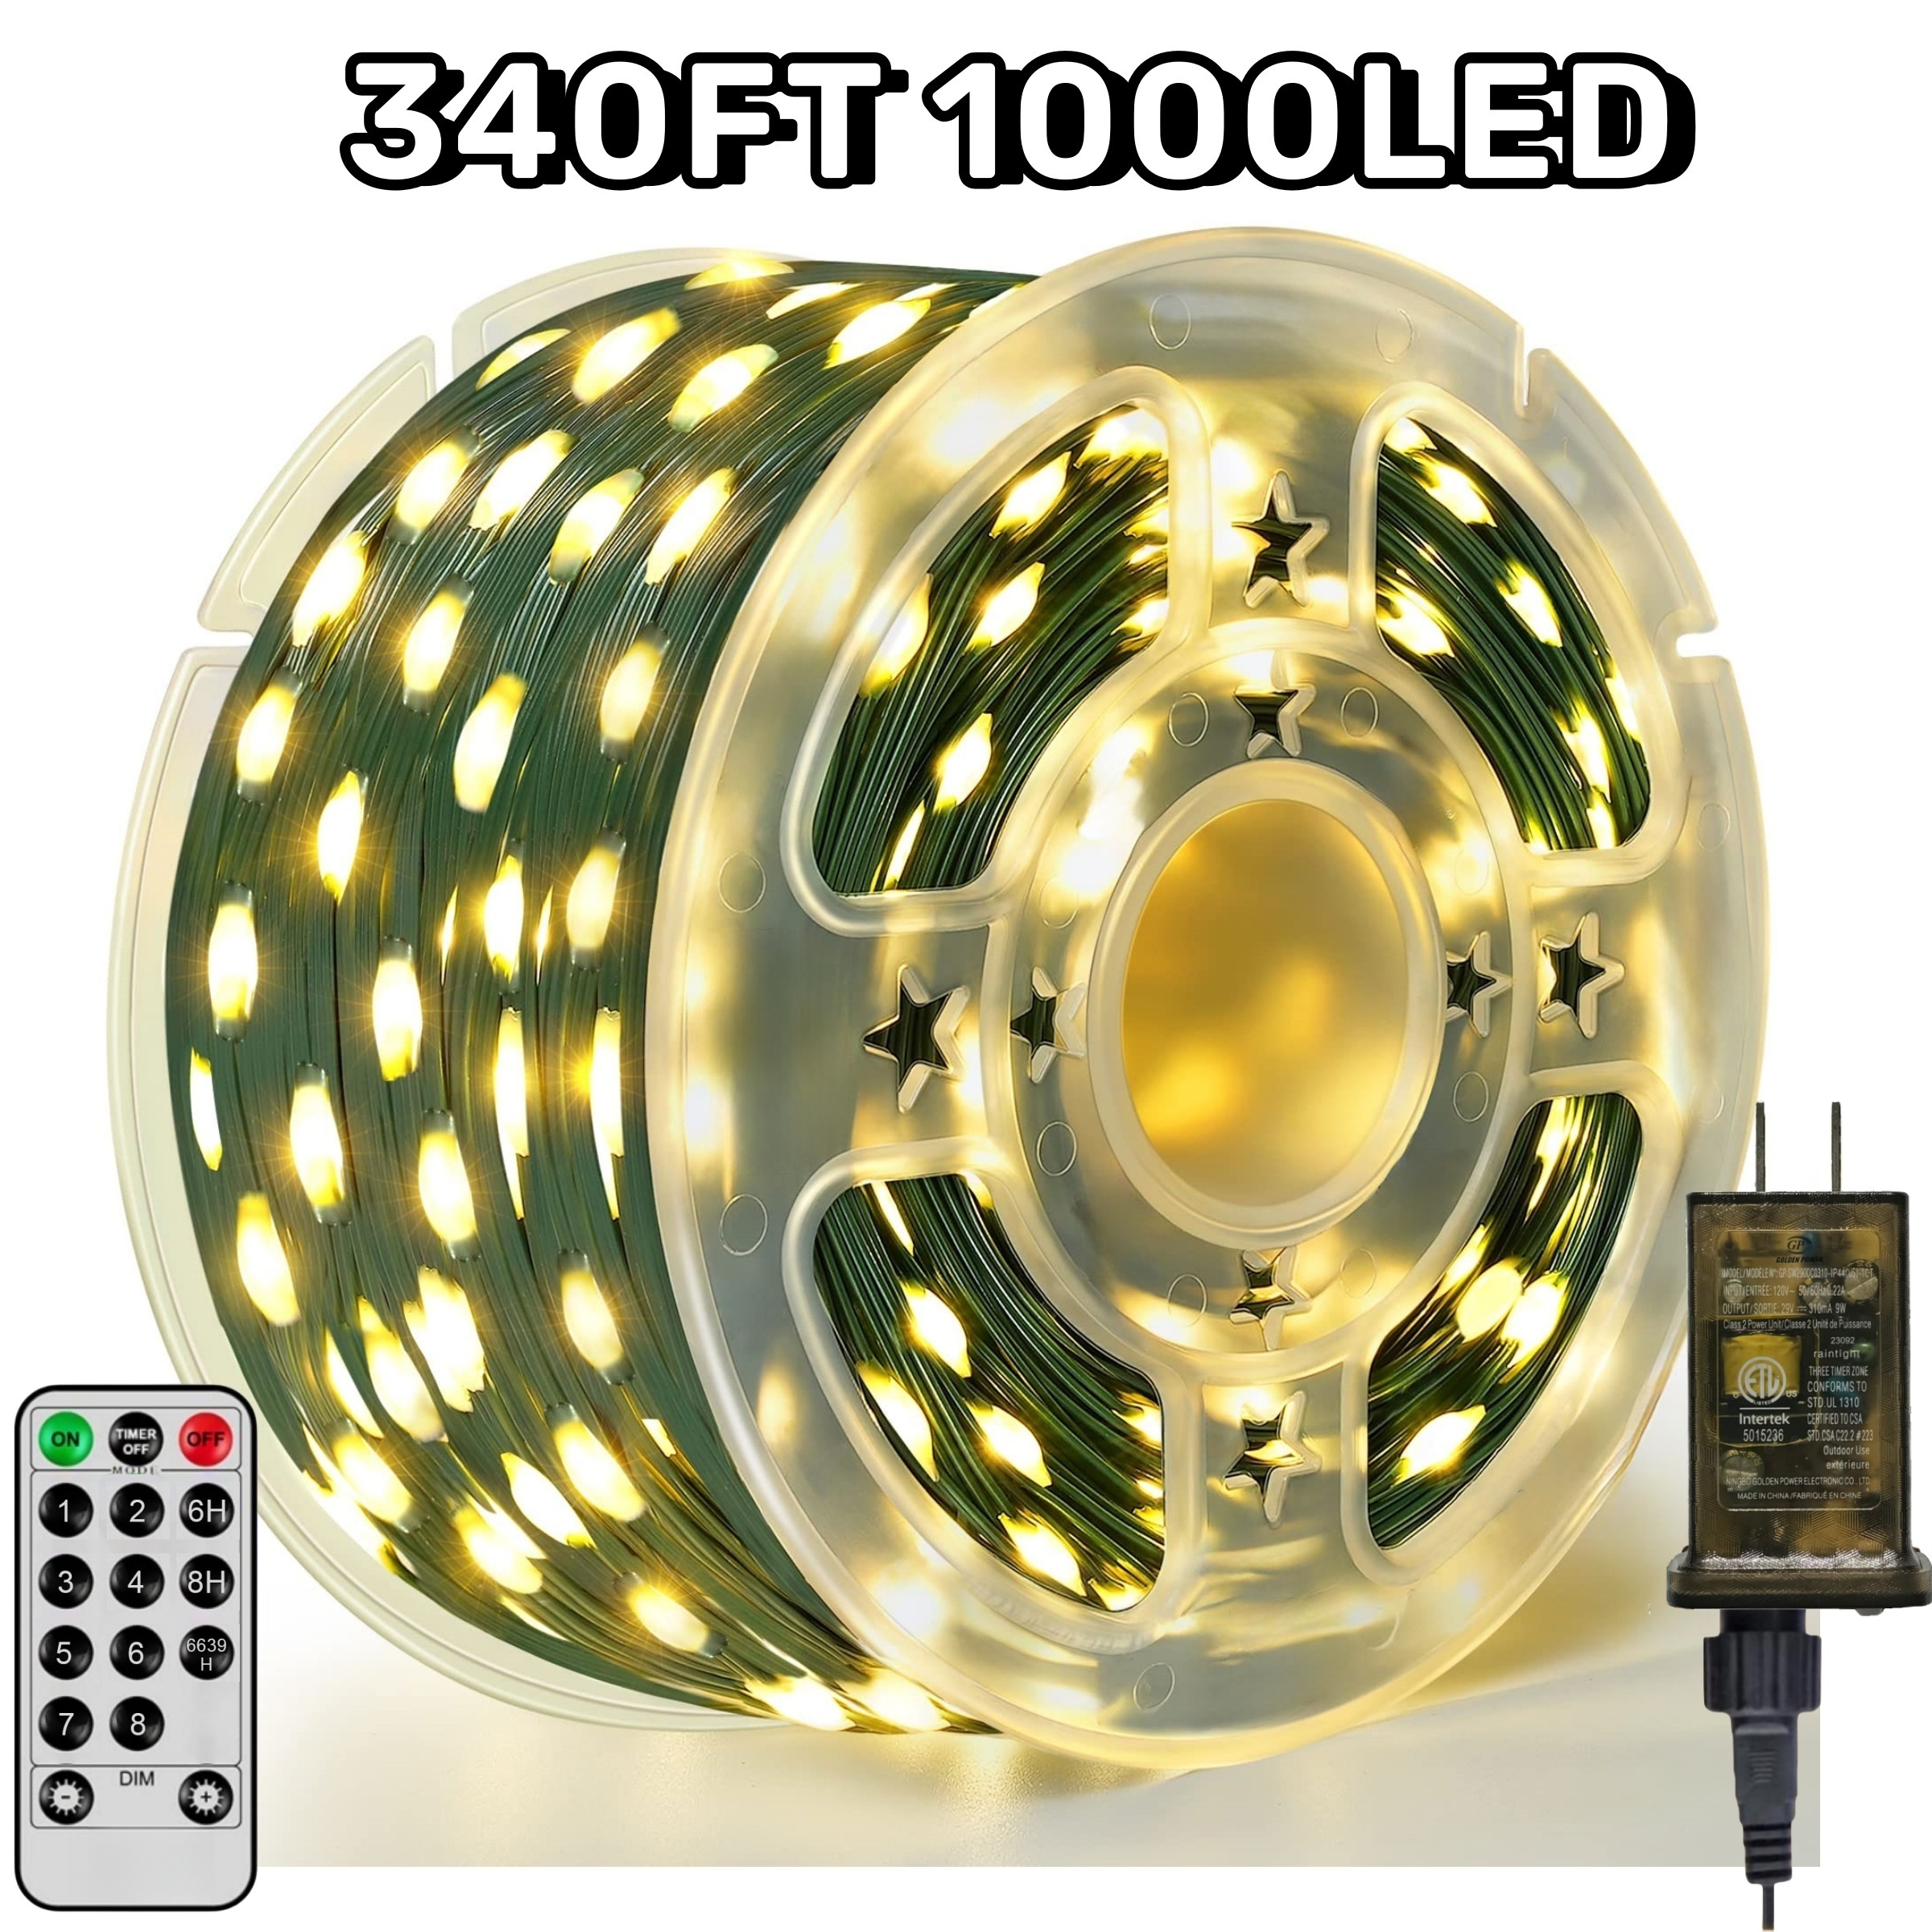 340 Feet 1000 LED Garden String Lights, Outdoor Waterproof Christmas Tree Lights, With 8 Modes Remote Timer, For Outdoor Indoor Christmas Decoration, Outdoor Multi-colored White Warm With Cable Tray, 7X12 Pure Copper Wire Color Box Packaging details 1